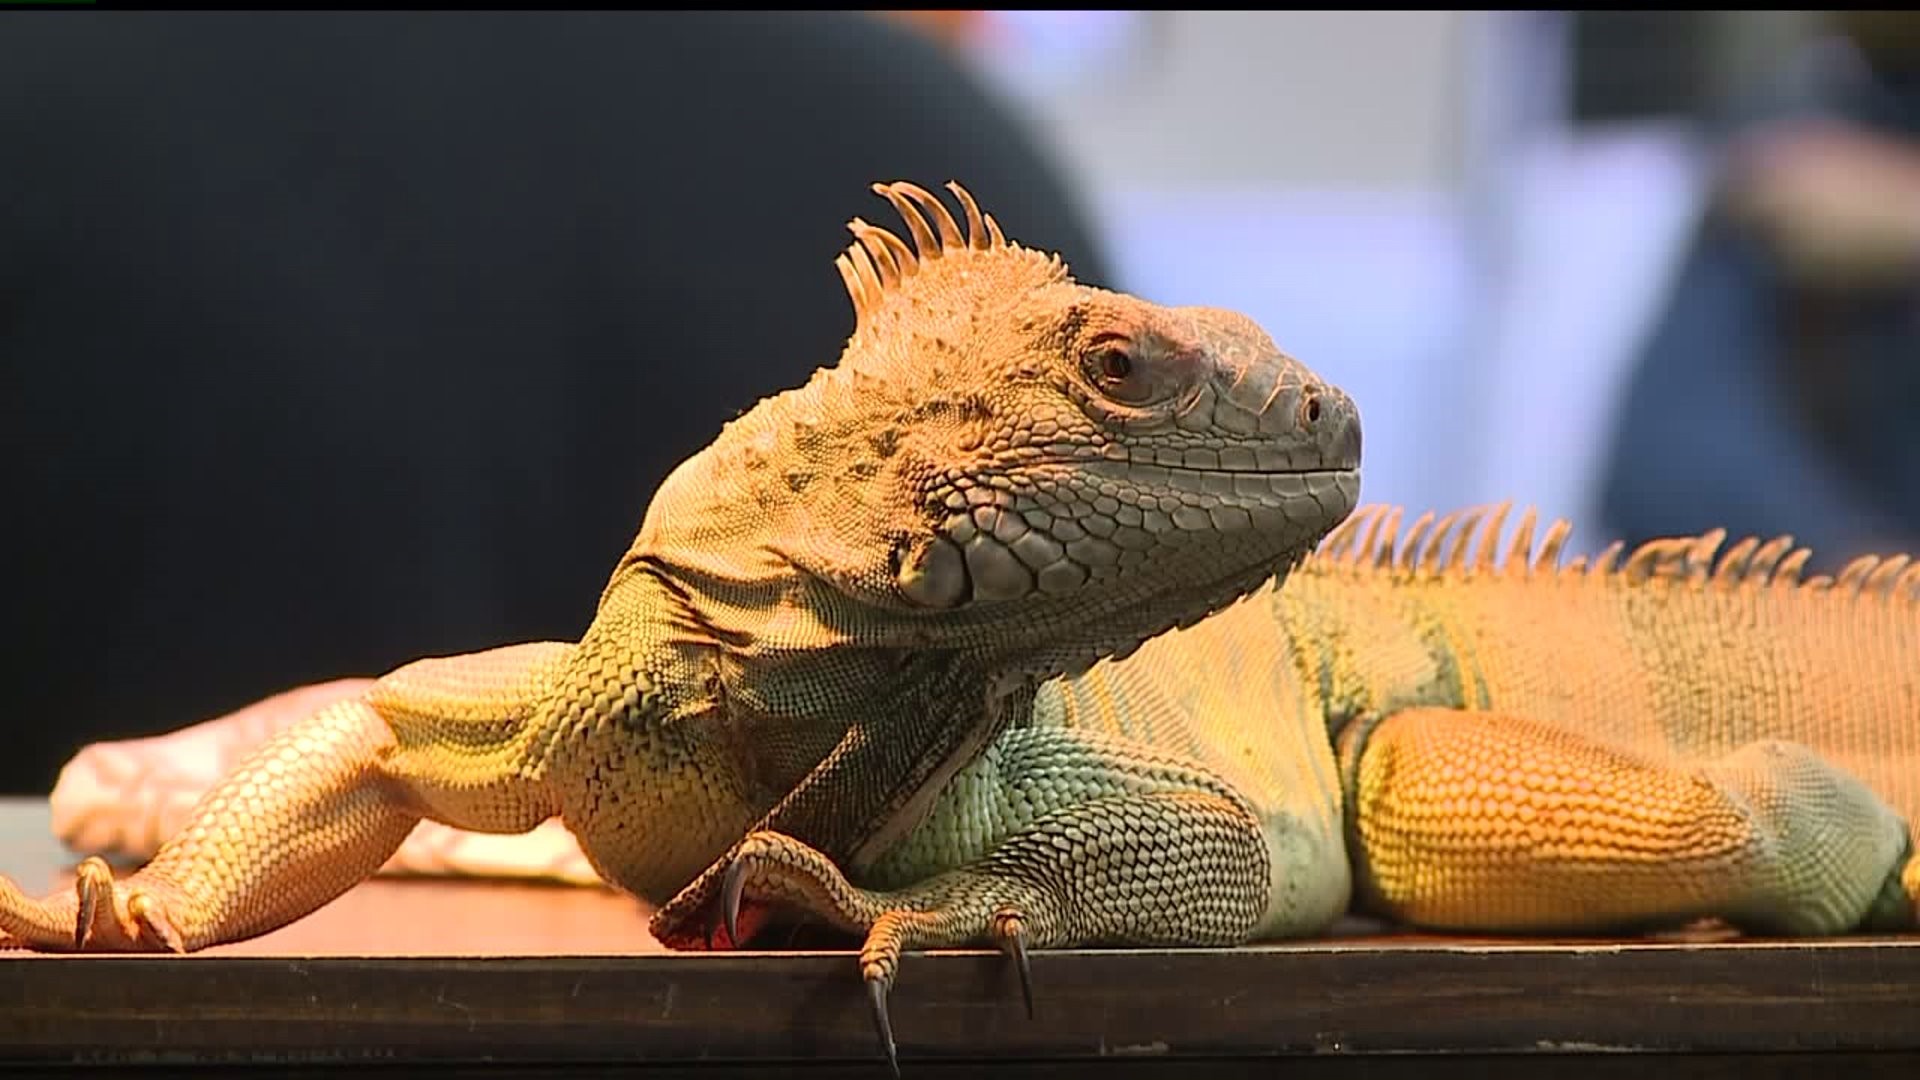 Exotic pet fans interact with vendors and others enthusiasts at